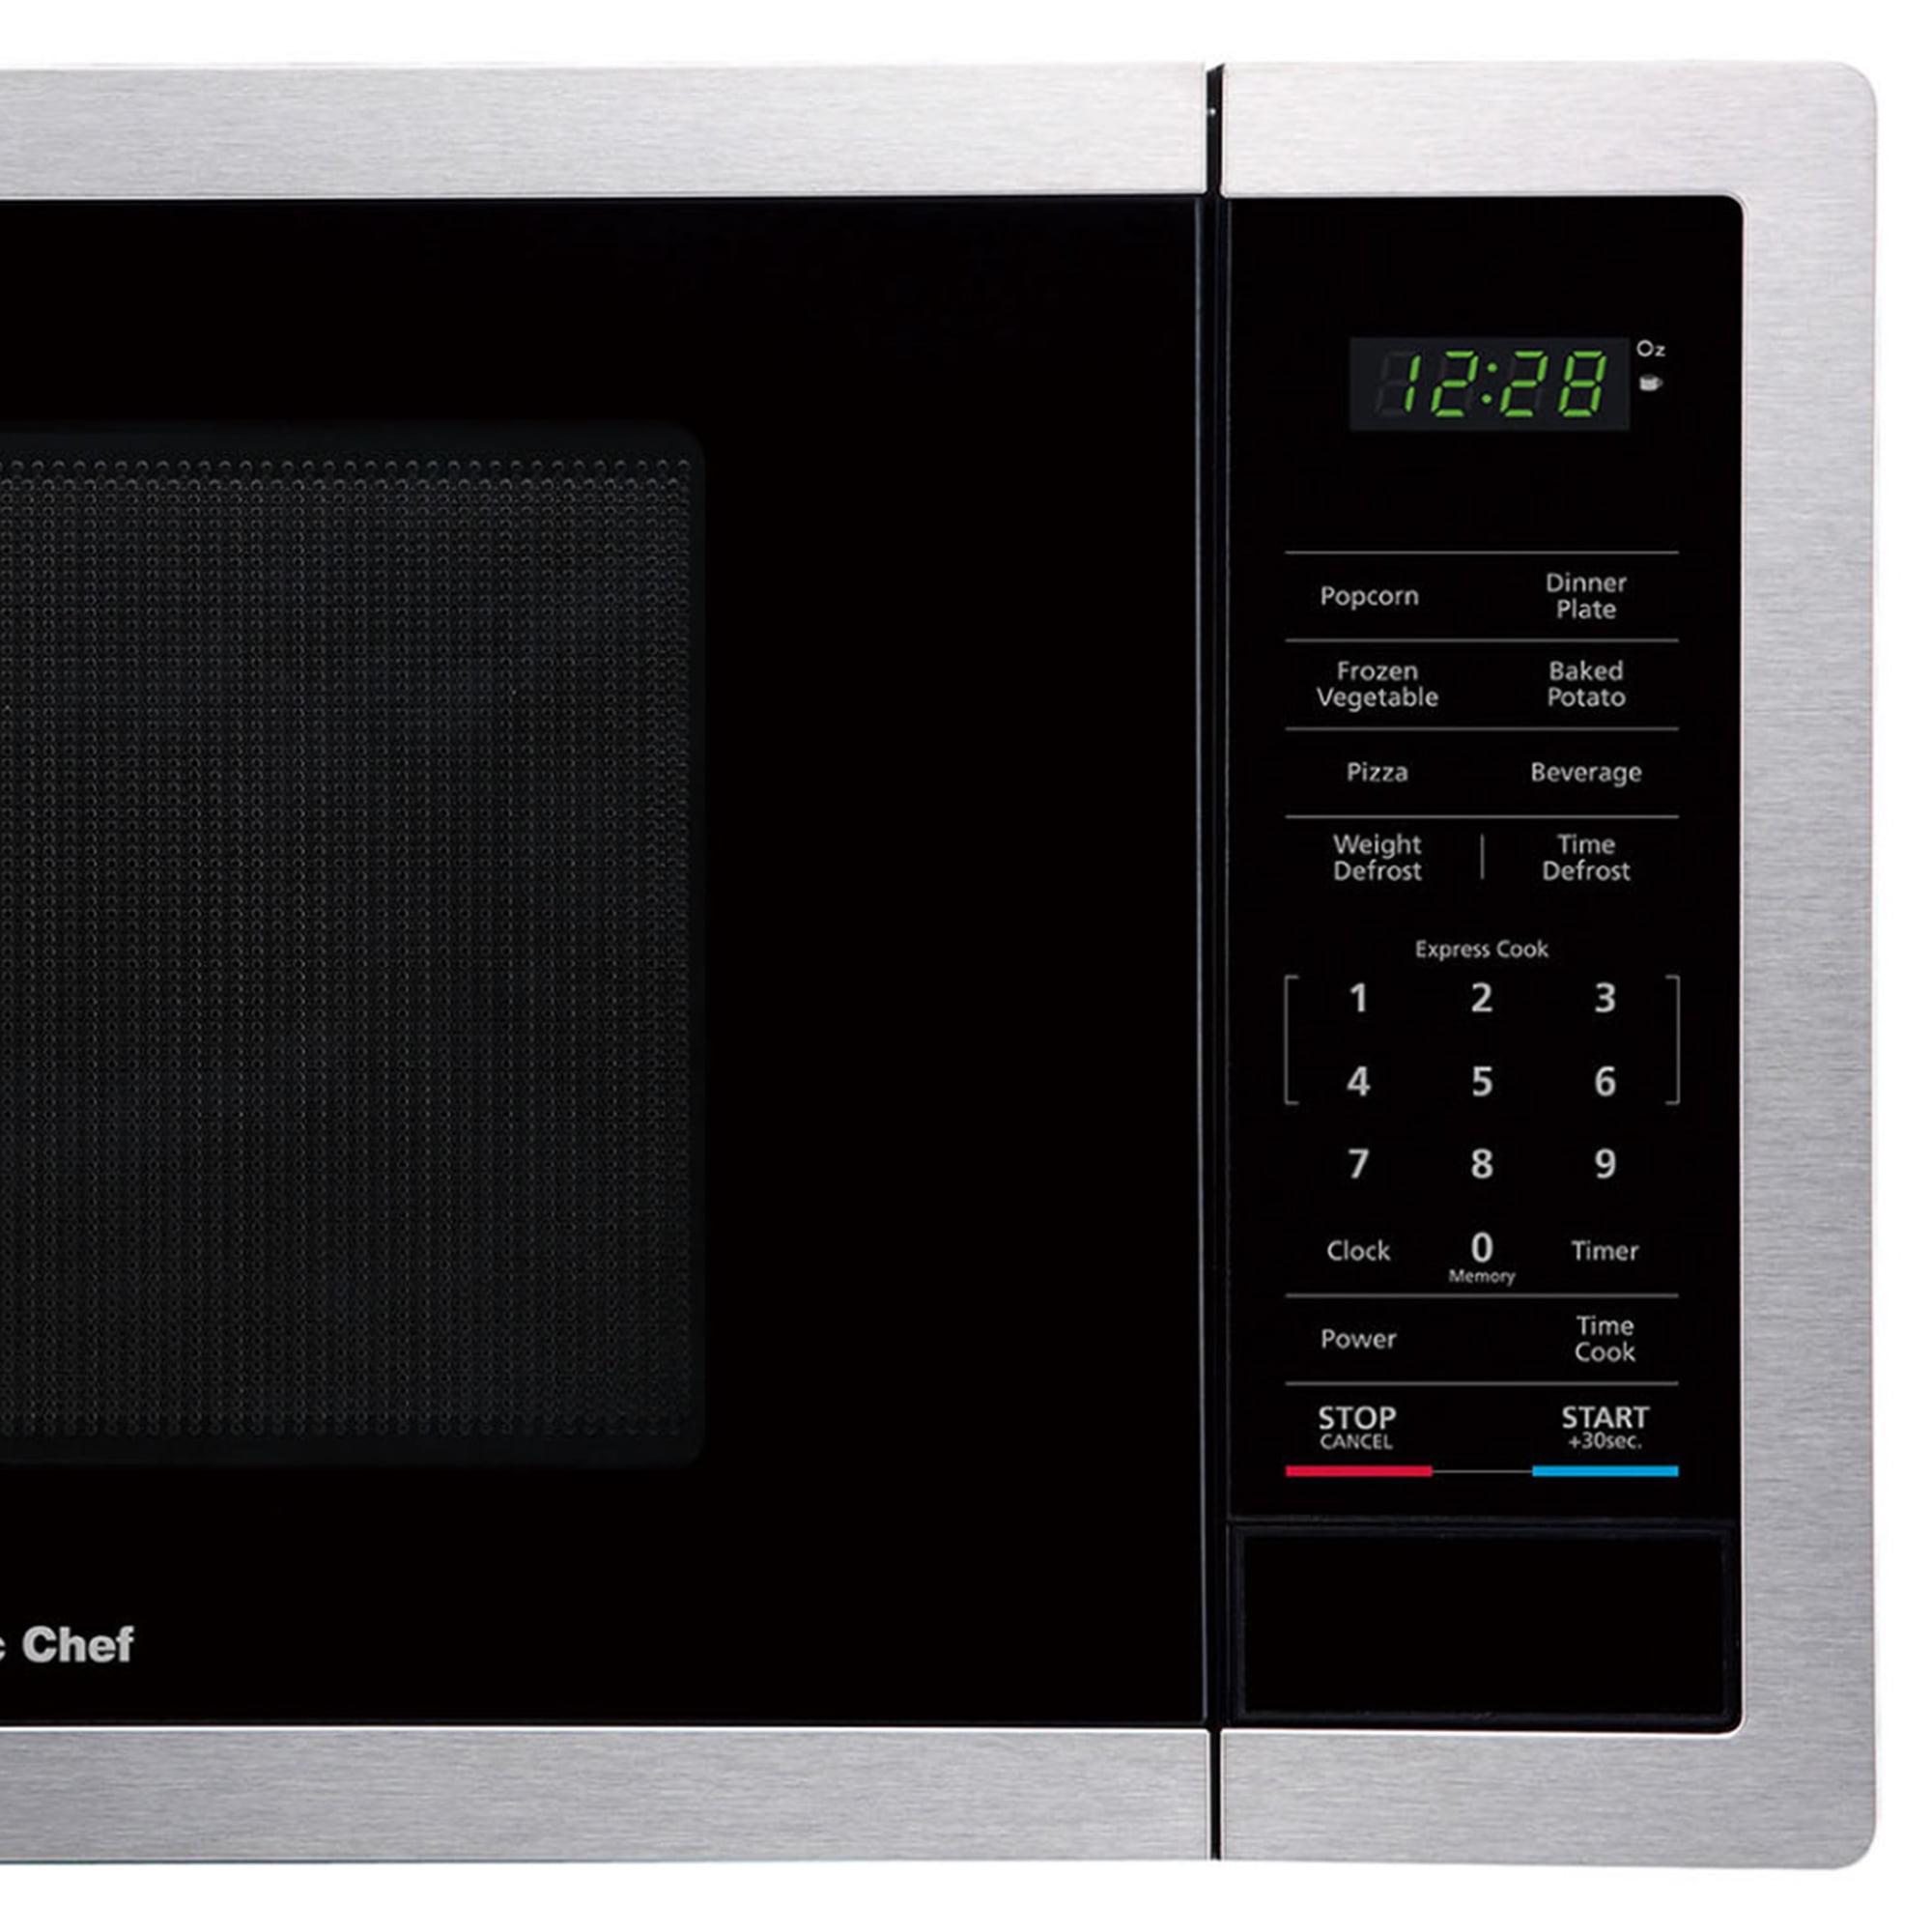 Magic Chef 0.9 cu. ft. 900-Watt Countertop Microwave in Stainless Steel  HMM990ST2 - The Home Depot